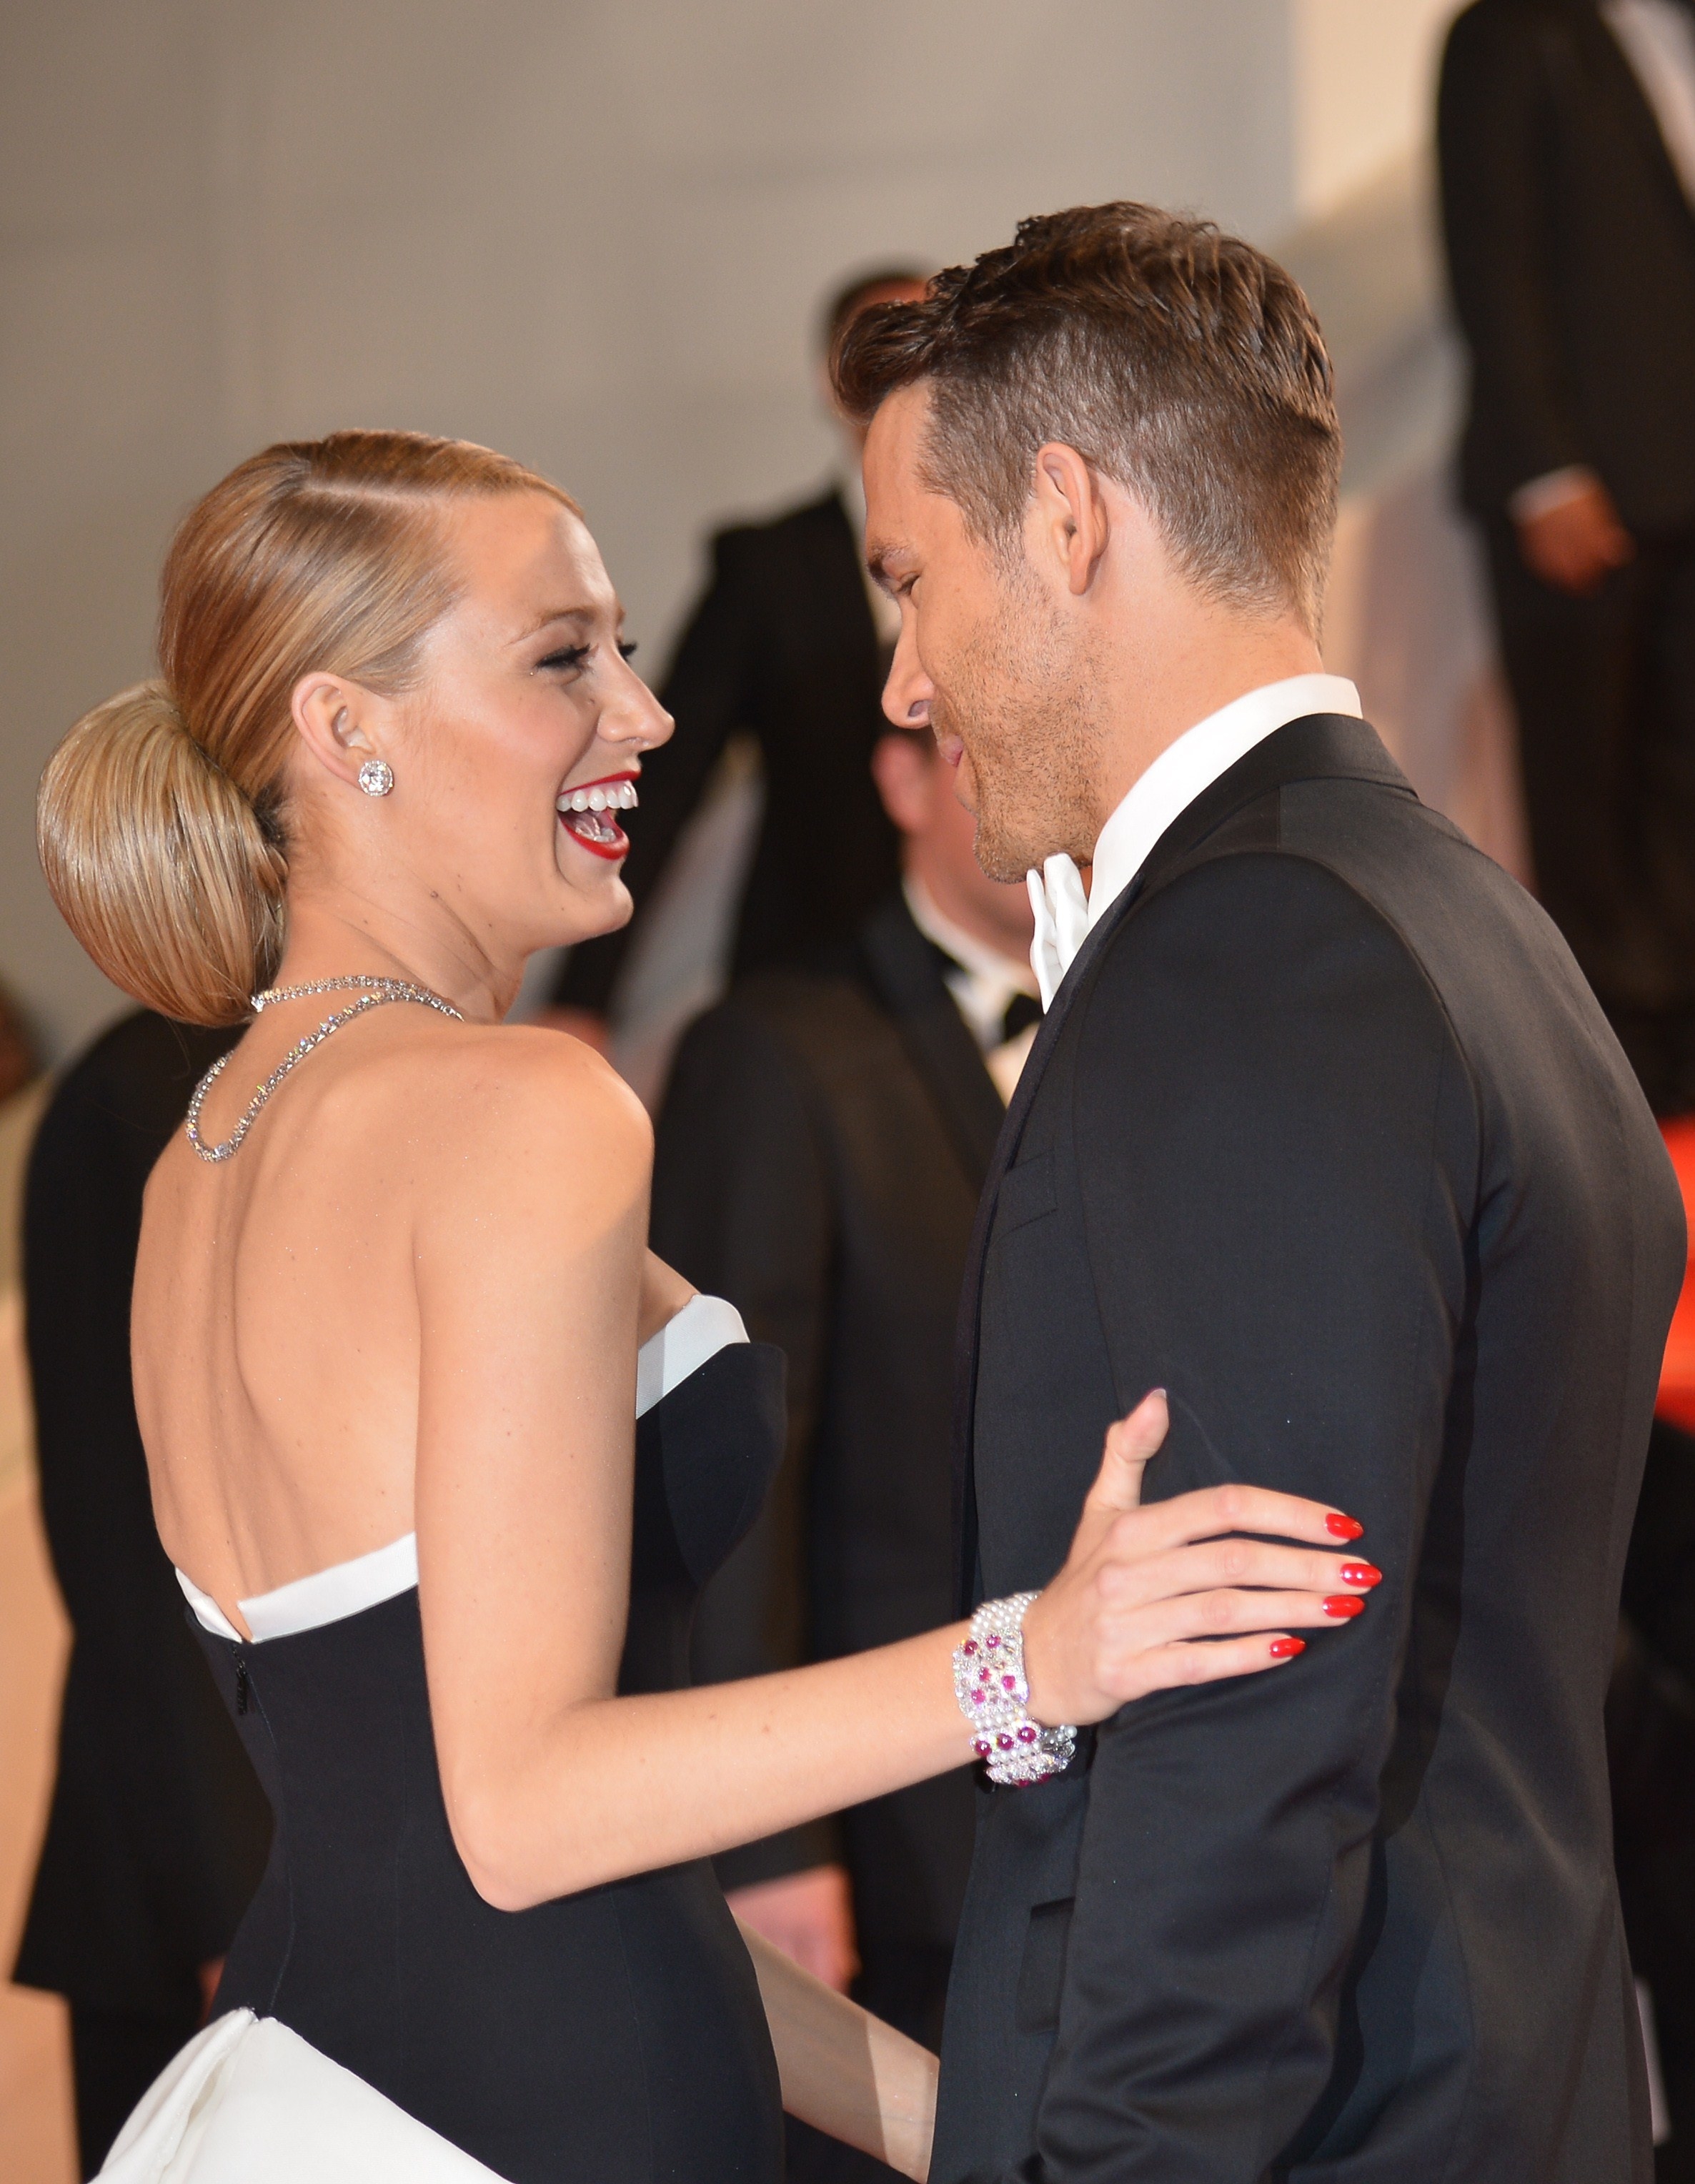 Blake Lively talking to Ryan Reynolds with her hand on his arm